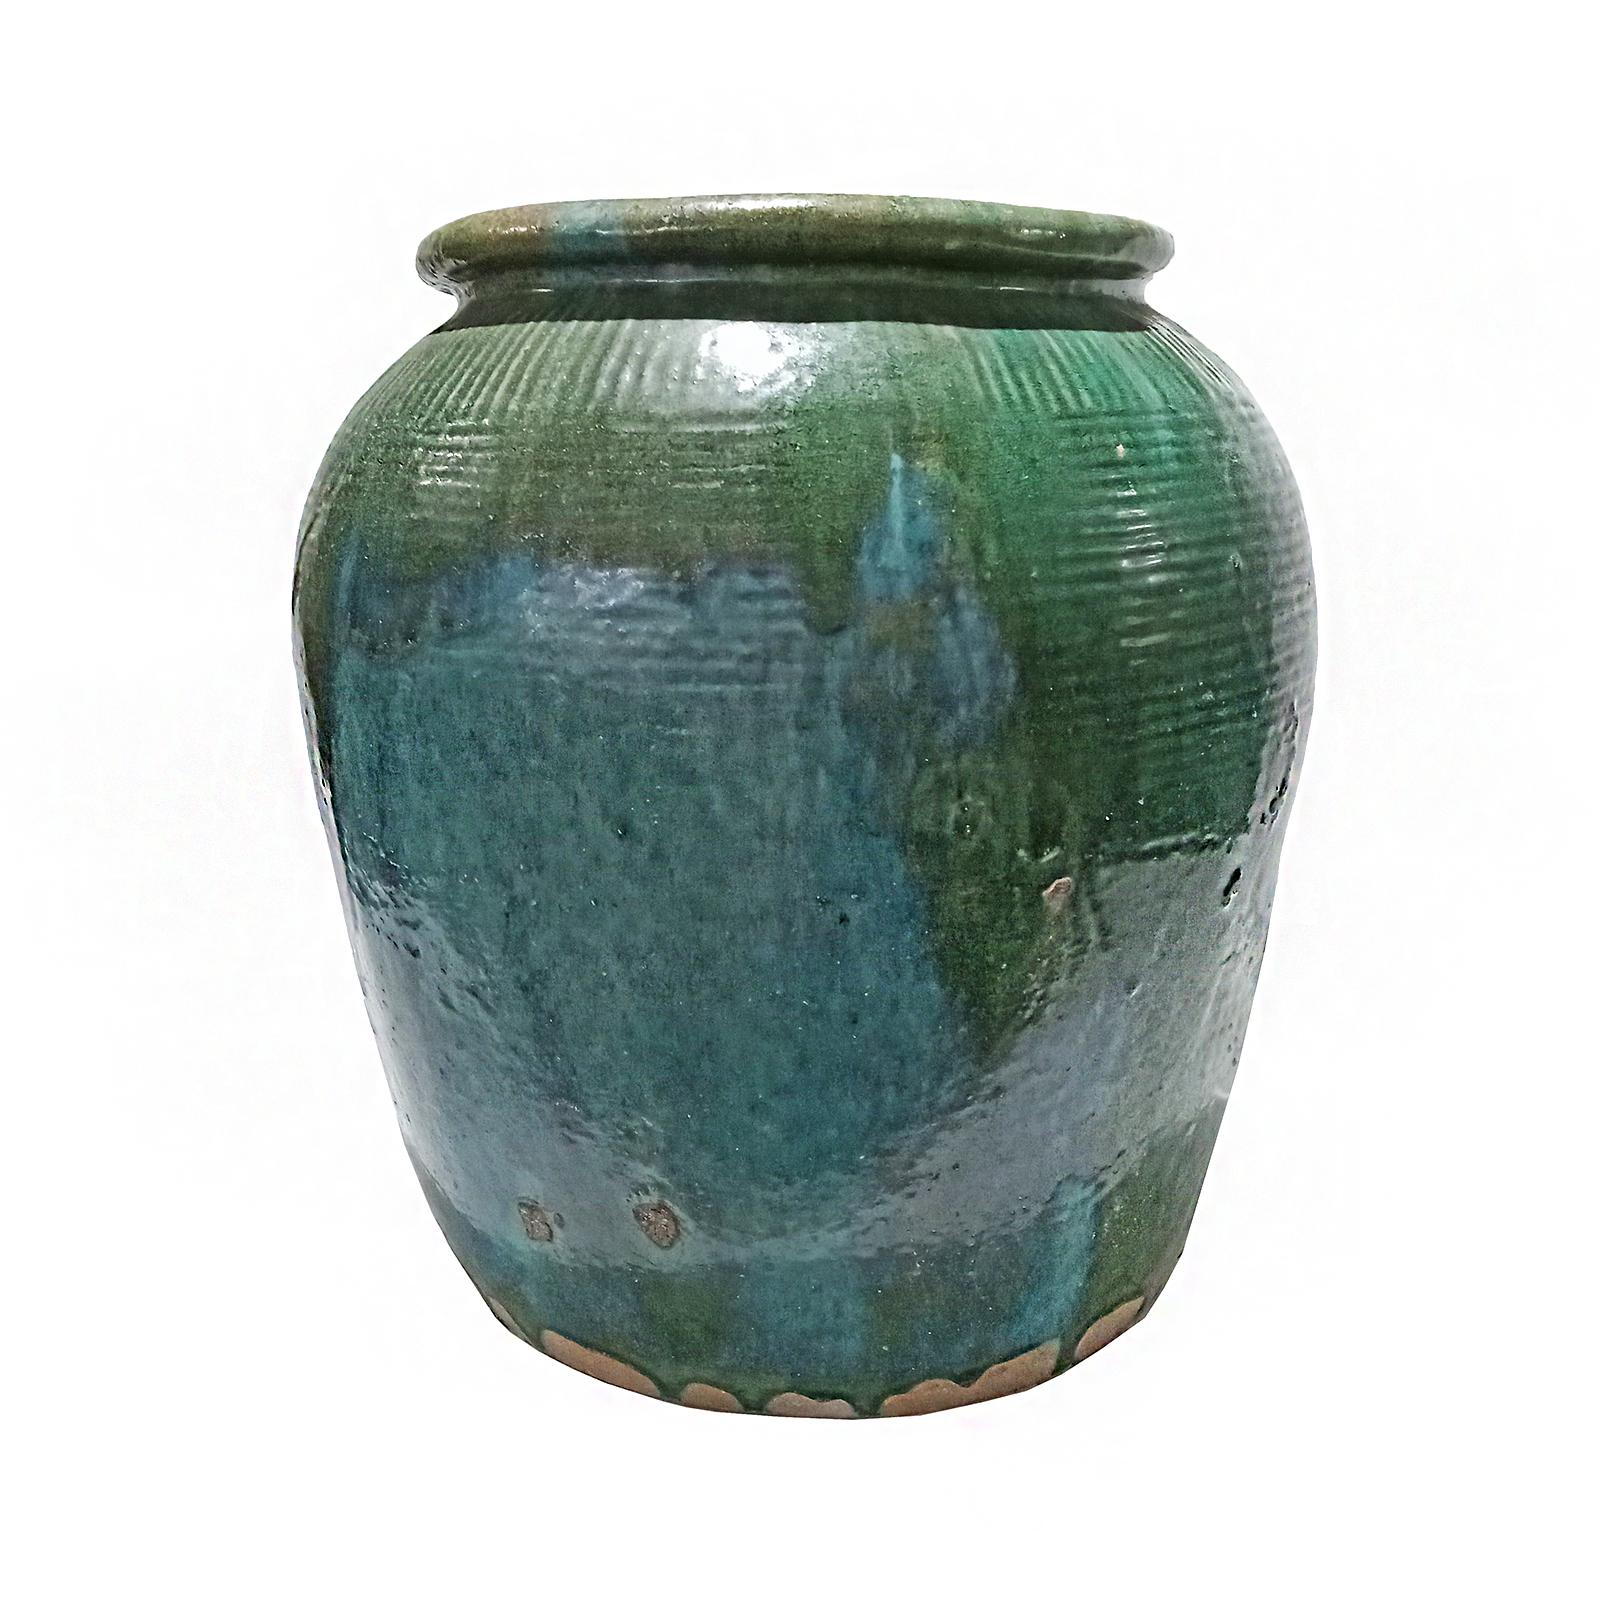 Indonesian Balinese Terracotta Vase / Jar / Urn with Green Glaze, Contemporary For Sale